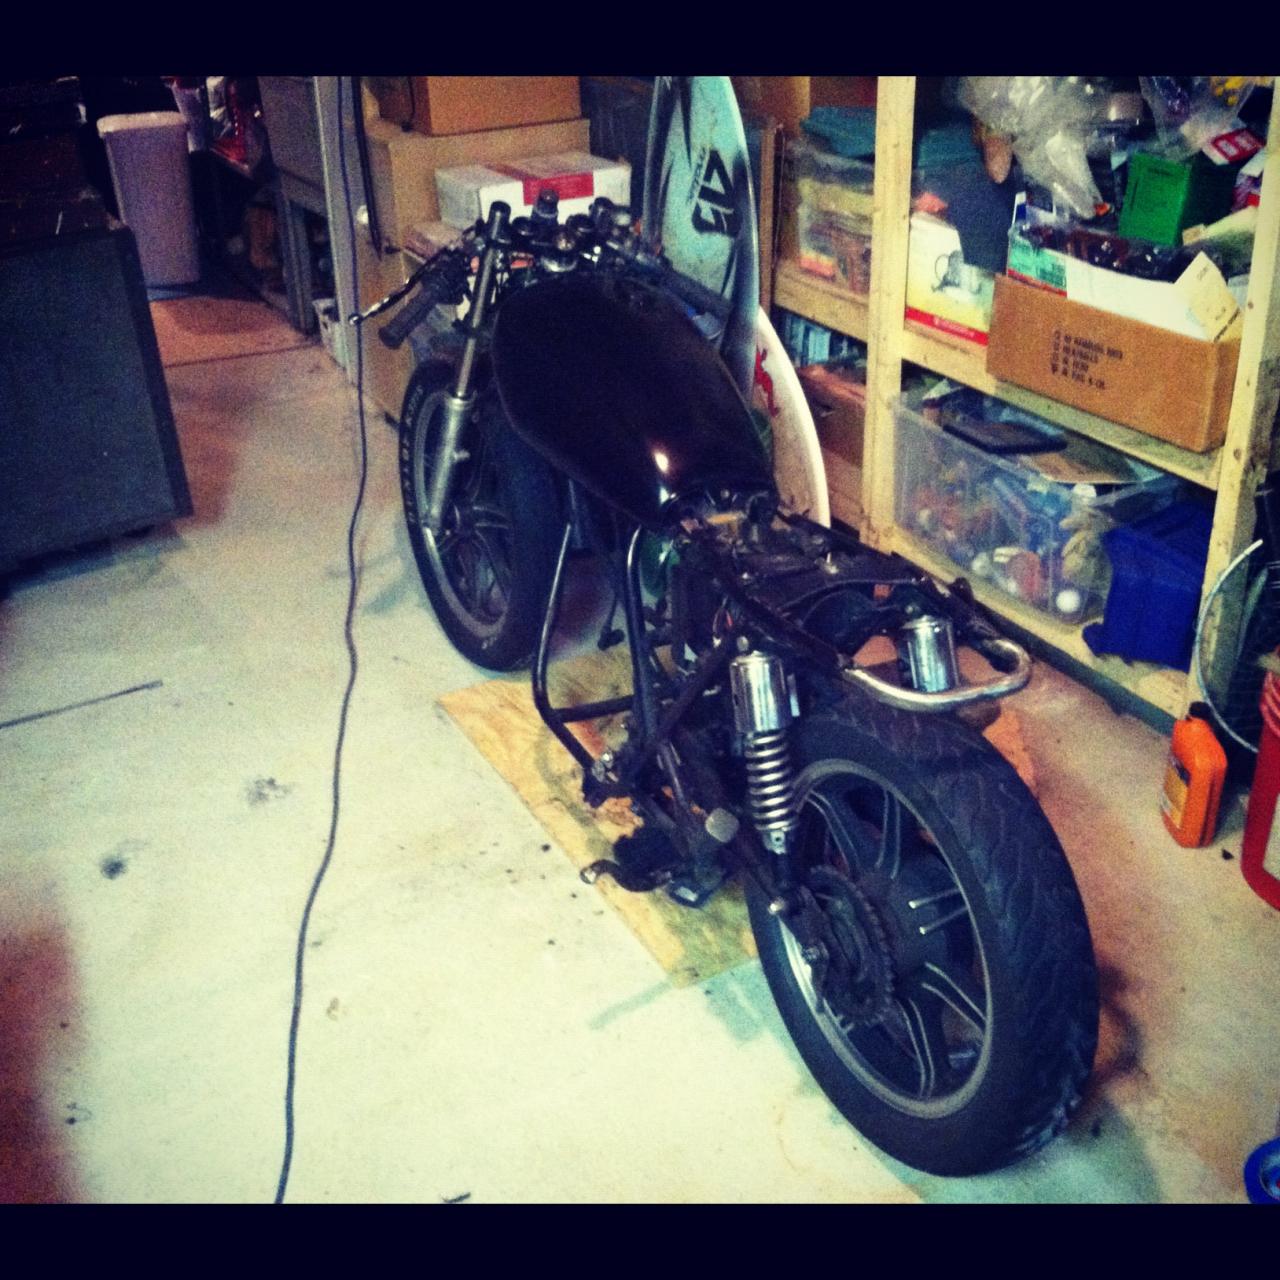 welded frame.
clip on bars.
custom fab'd seat from rolled steel.
bondo/painted tank.
lowered forks.
removed; gauges, fenders, stock headlamp/tail